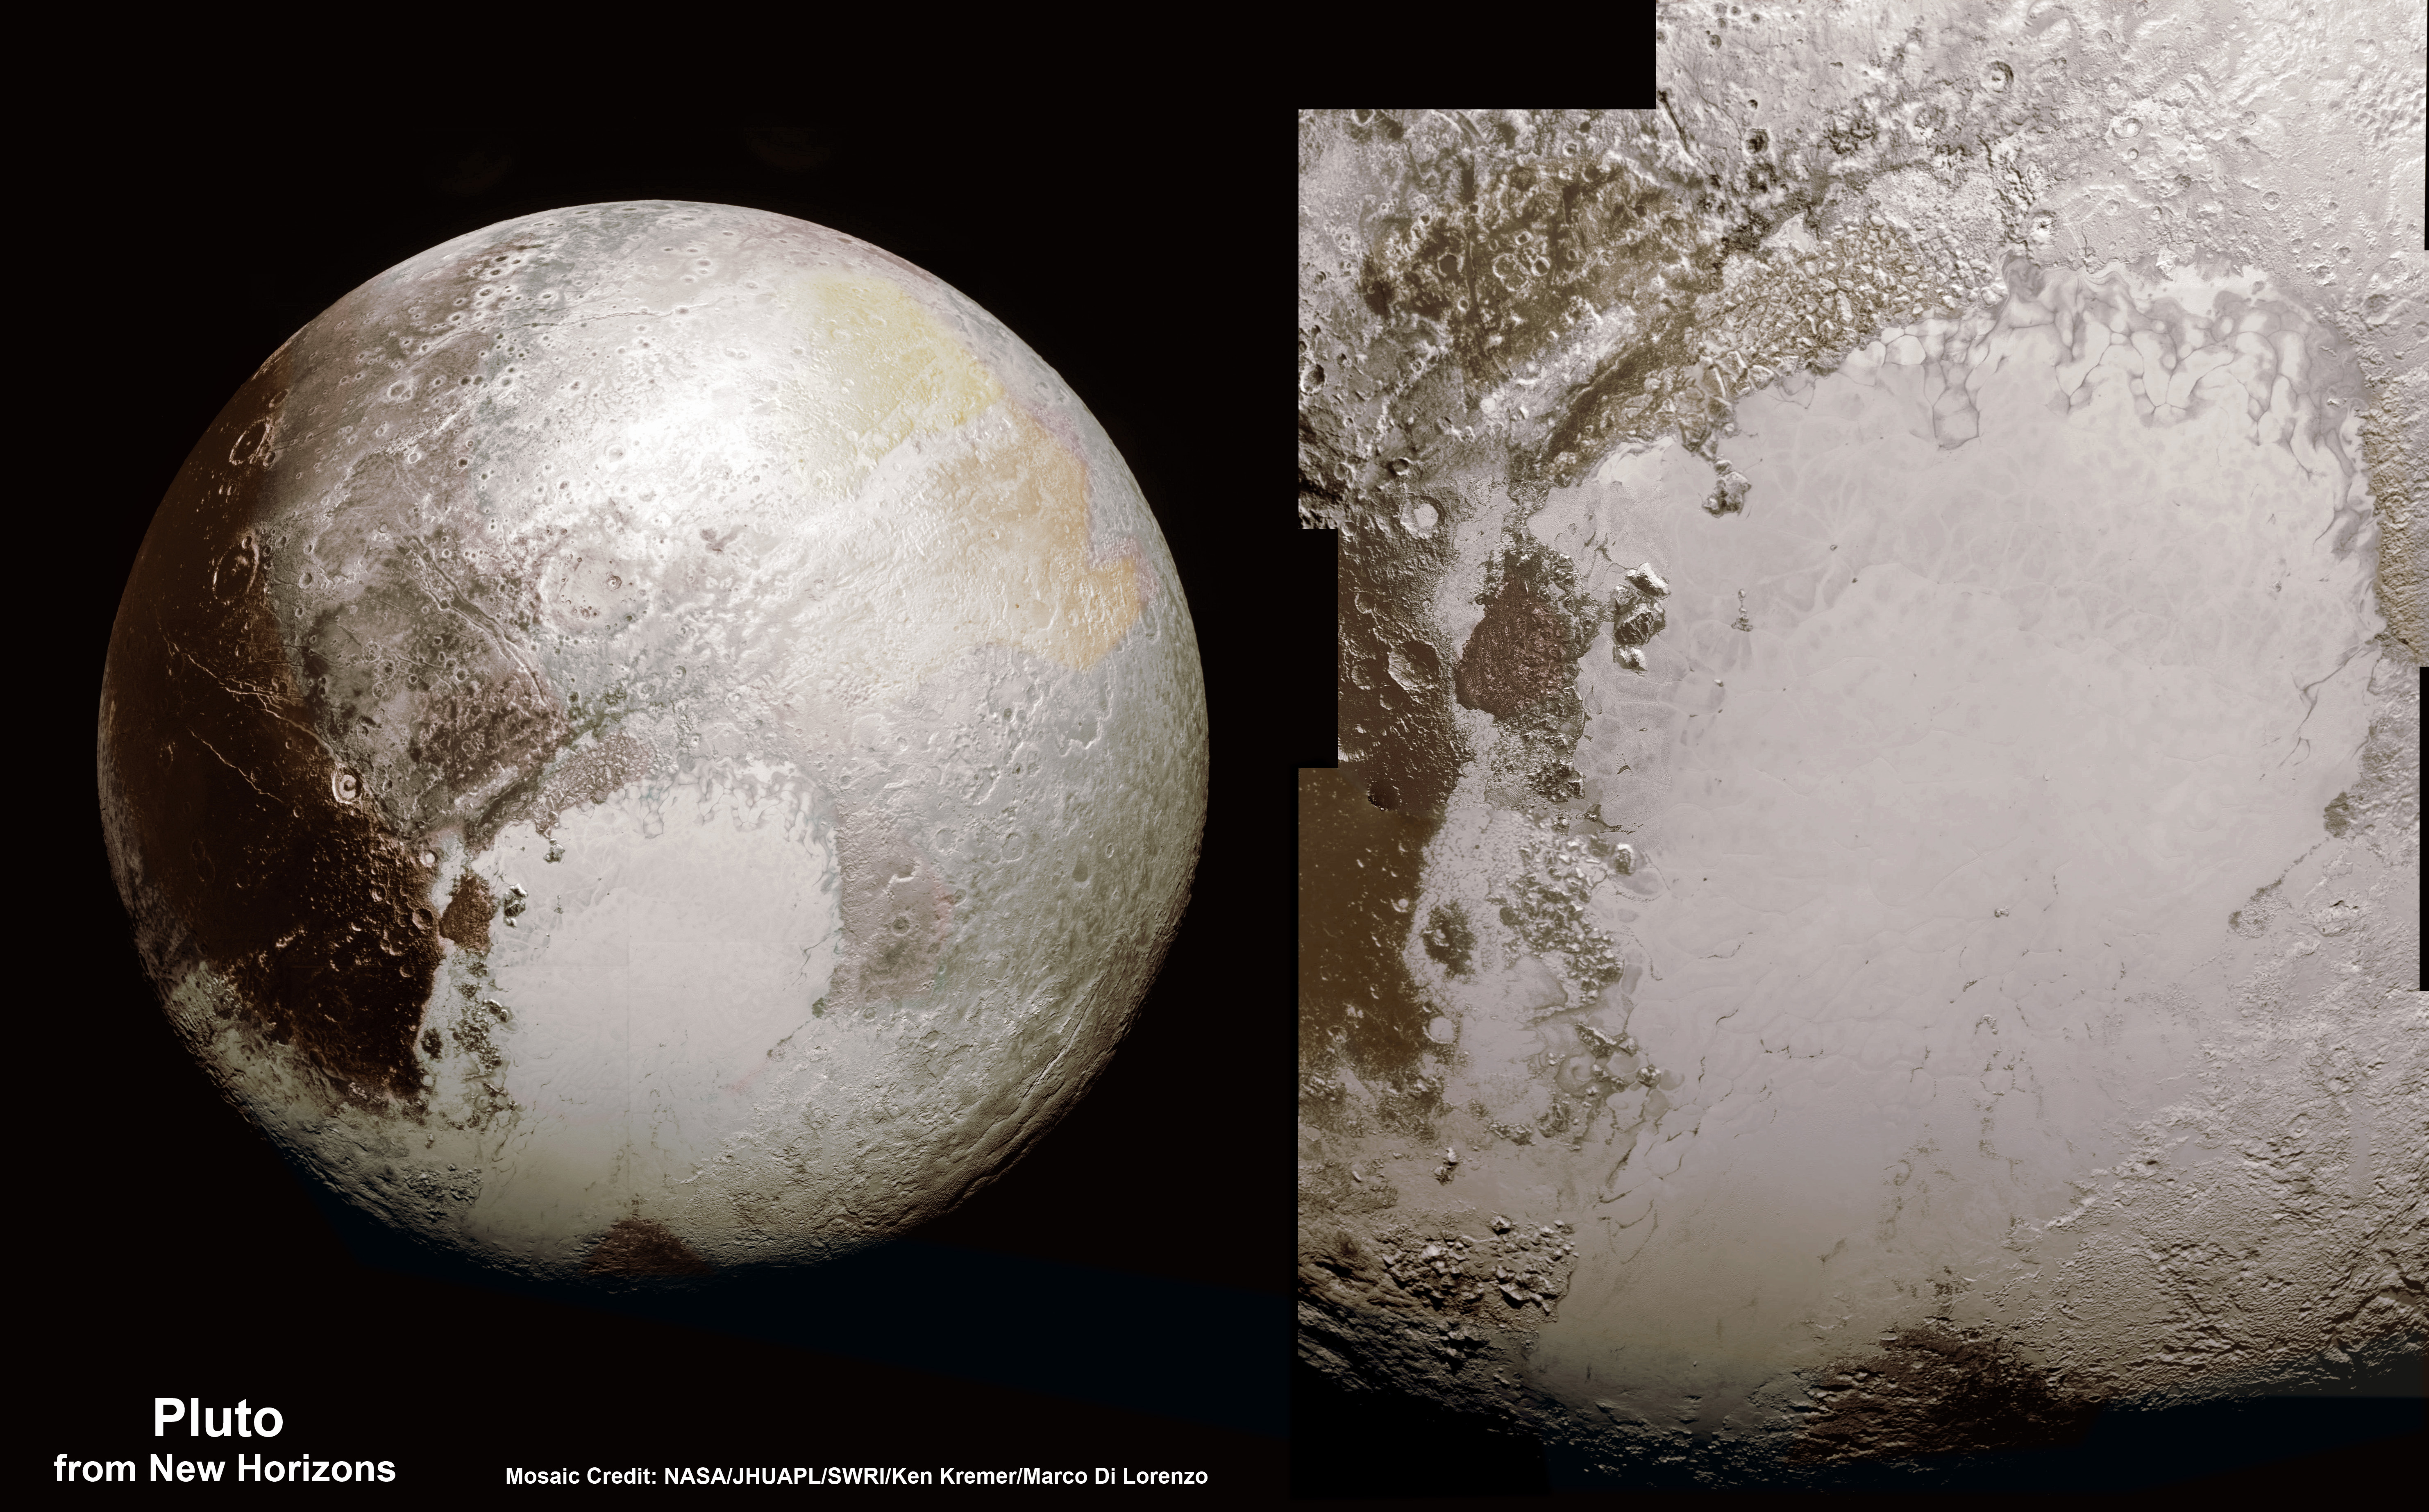 This new global mosaic view of Pluto was created from the latest high-resolution images to be downlinked from NASA’s New Horizons spacecraft and released on Sept. 11, 2015.   The images were taken as New Horizons flew past Pluto on July 14, 2015, from a distance of 50,000 miles (80,000 kilometers).  This mosaic was stitched from over two dozen raw images captured by the LORRI imager and colorized.  Right side mosaic comprises twelve highest resolution views of Tombaugh Regio heart shaped feature and shows objects as small as 0.5 miles (0.8 kilometers) in size.  Credits: NASA/Johns Hopkins University Applied Physics Laboratory/Southwest Research Institute/ Ken Kremer/kenkremer.com/Marco Di Lorenzo 